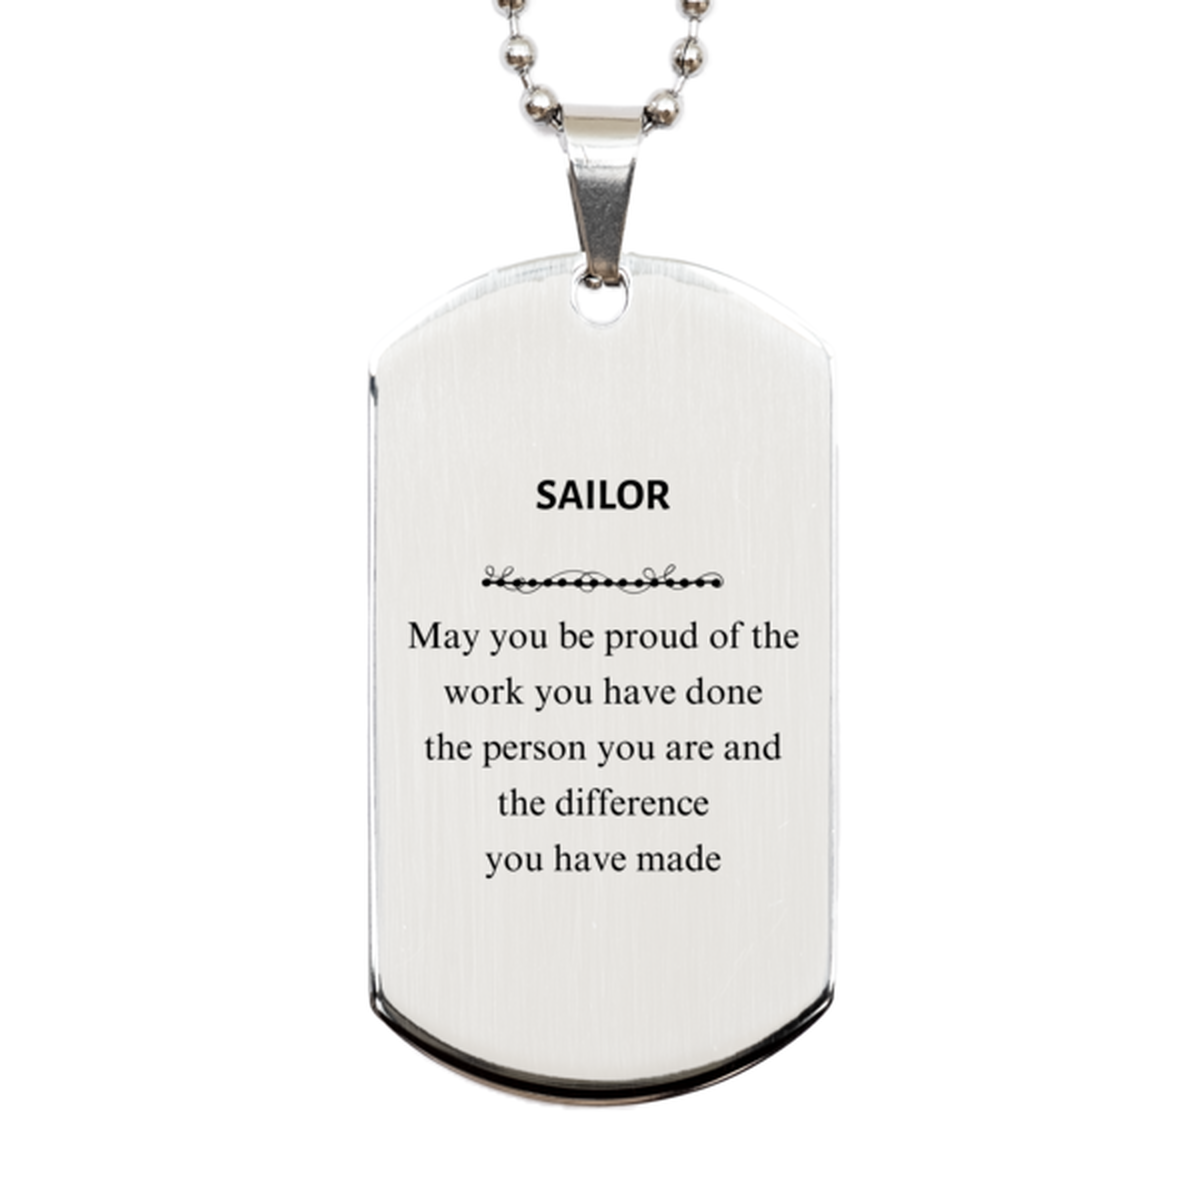 Sailor May you be proud of the work you have done, Retirement Sailor Silver Dog Tag for Colleague Appreciation Gifts Amazing for Sailor